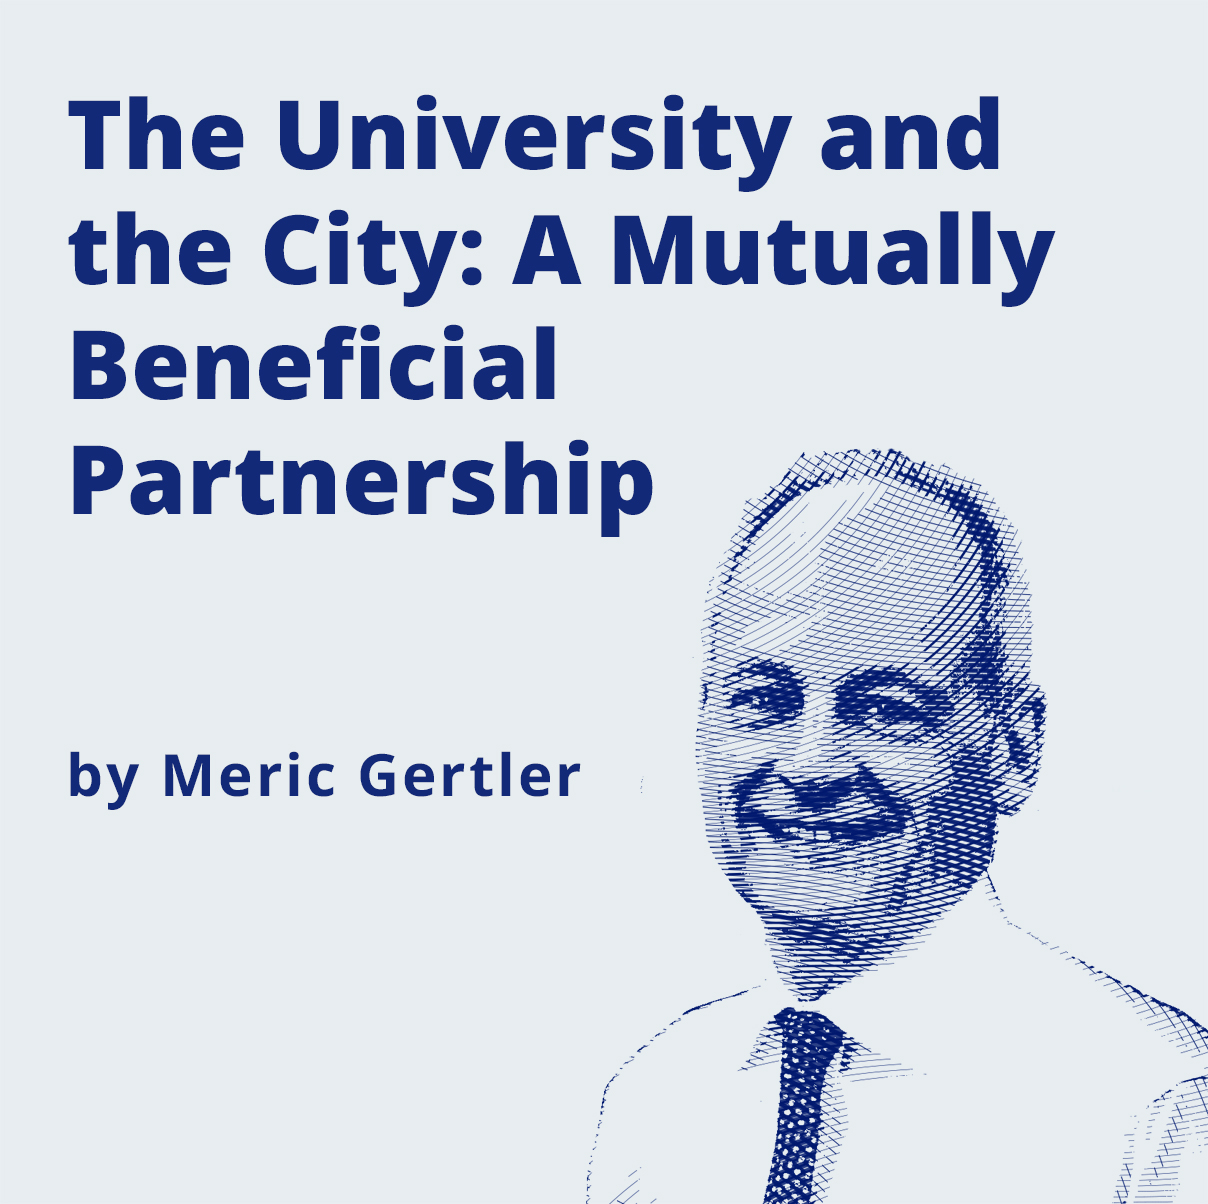 image - The University and the City: A Symbiotic Partnership by Meric Gertler